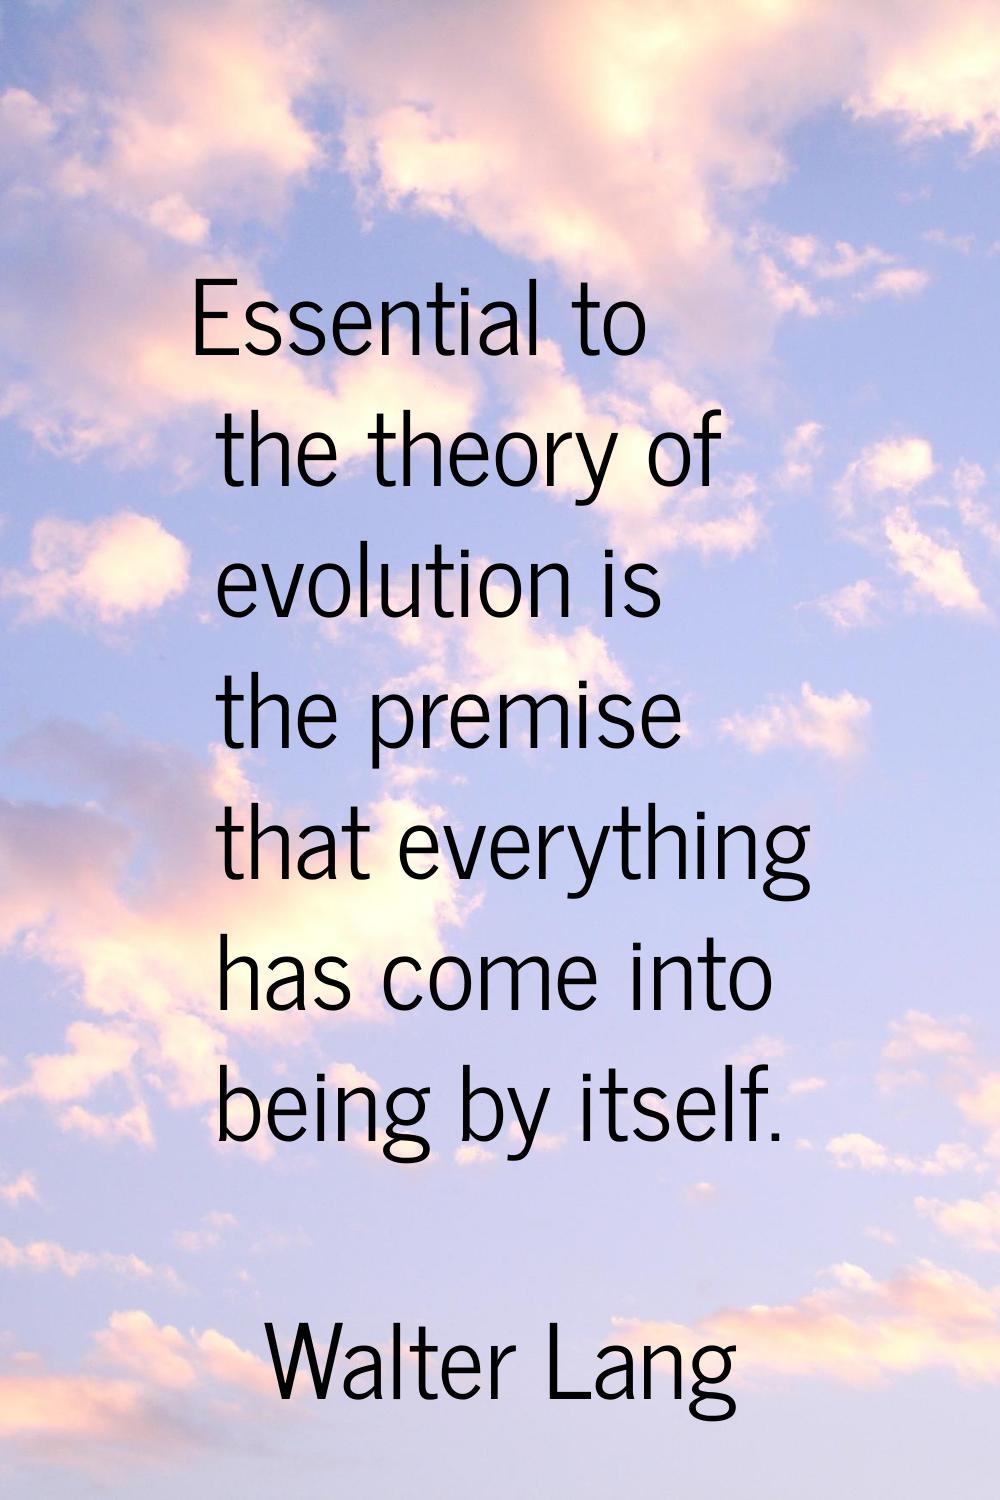 Essential to the theory of evolution is the premise that everything has come into being by itself.